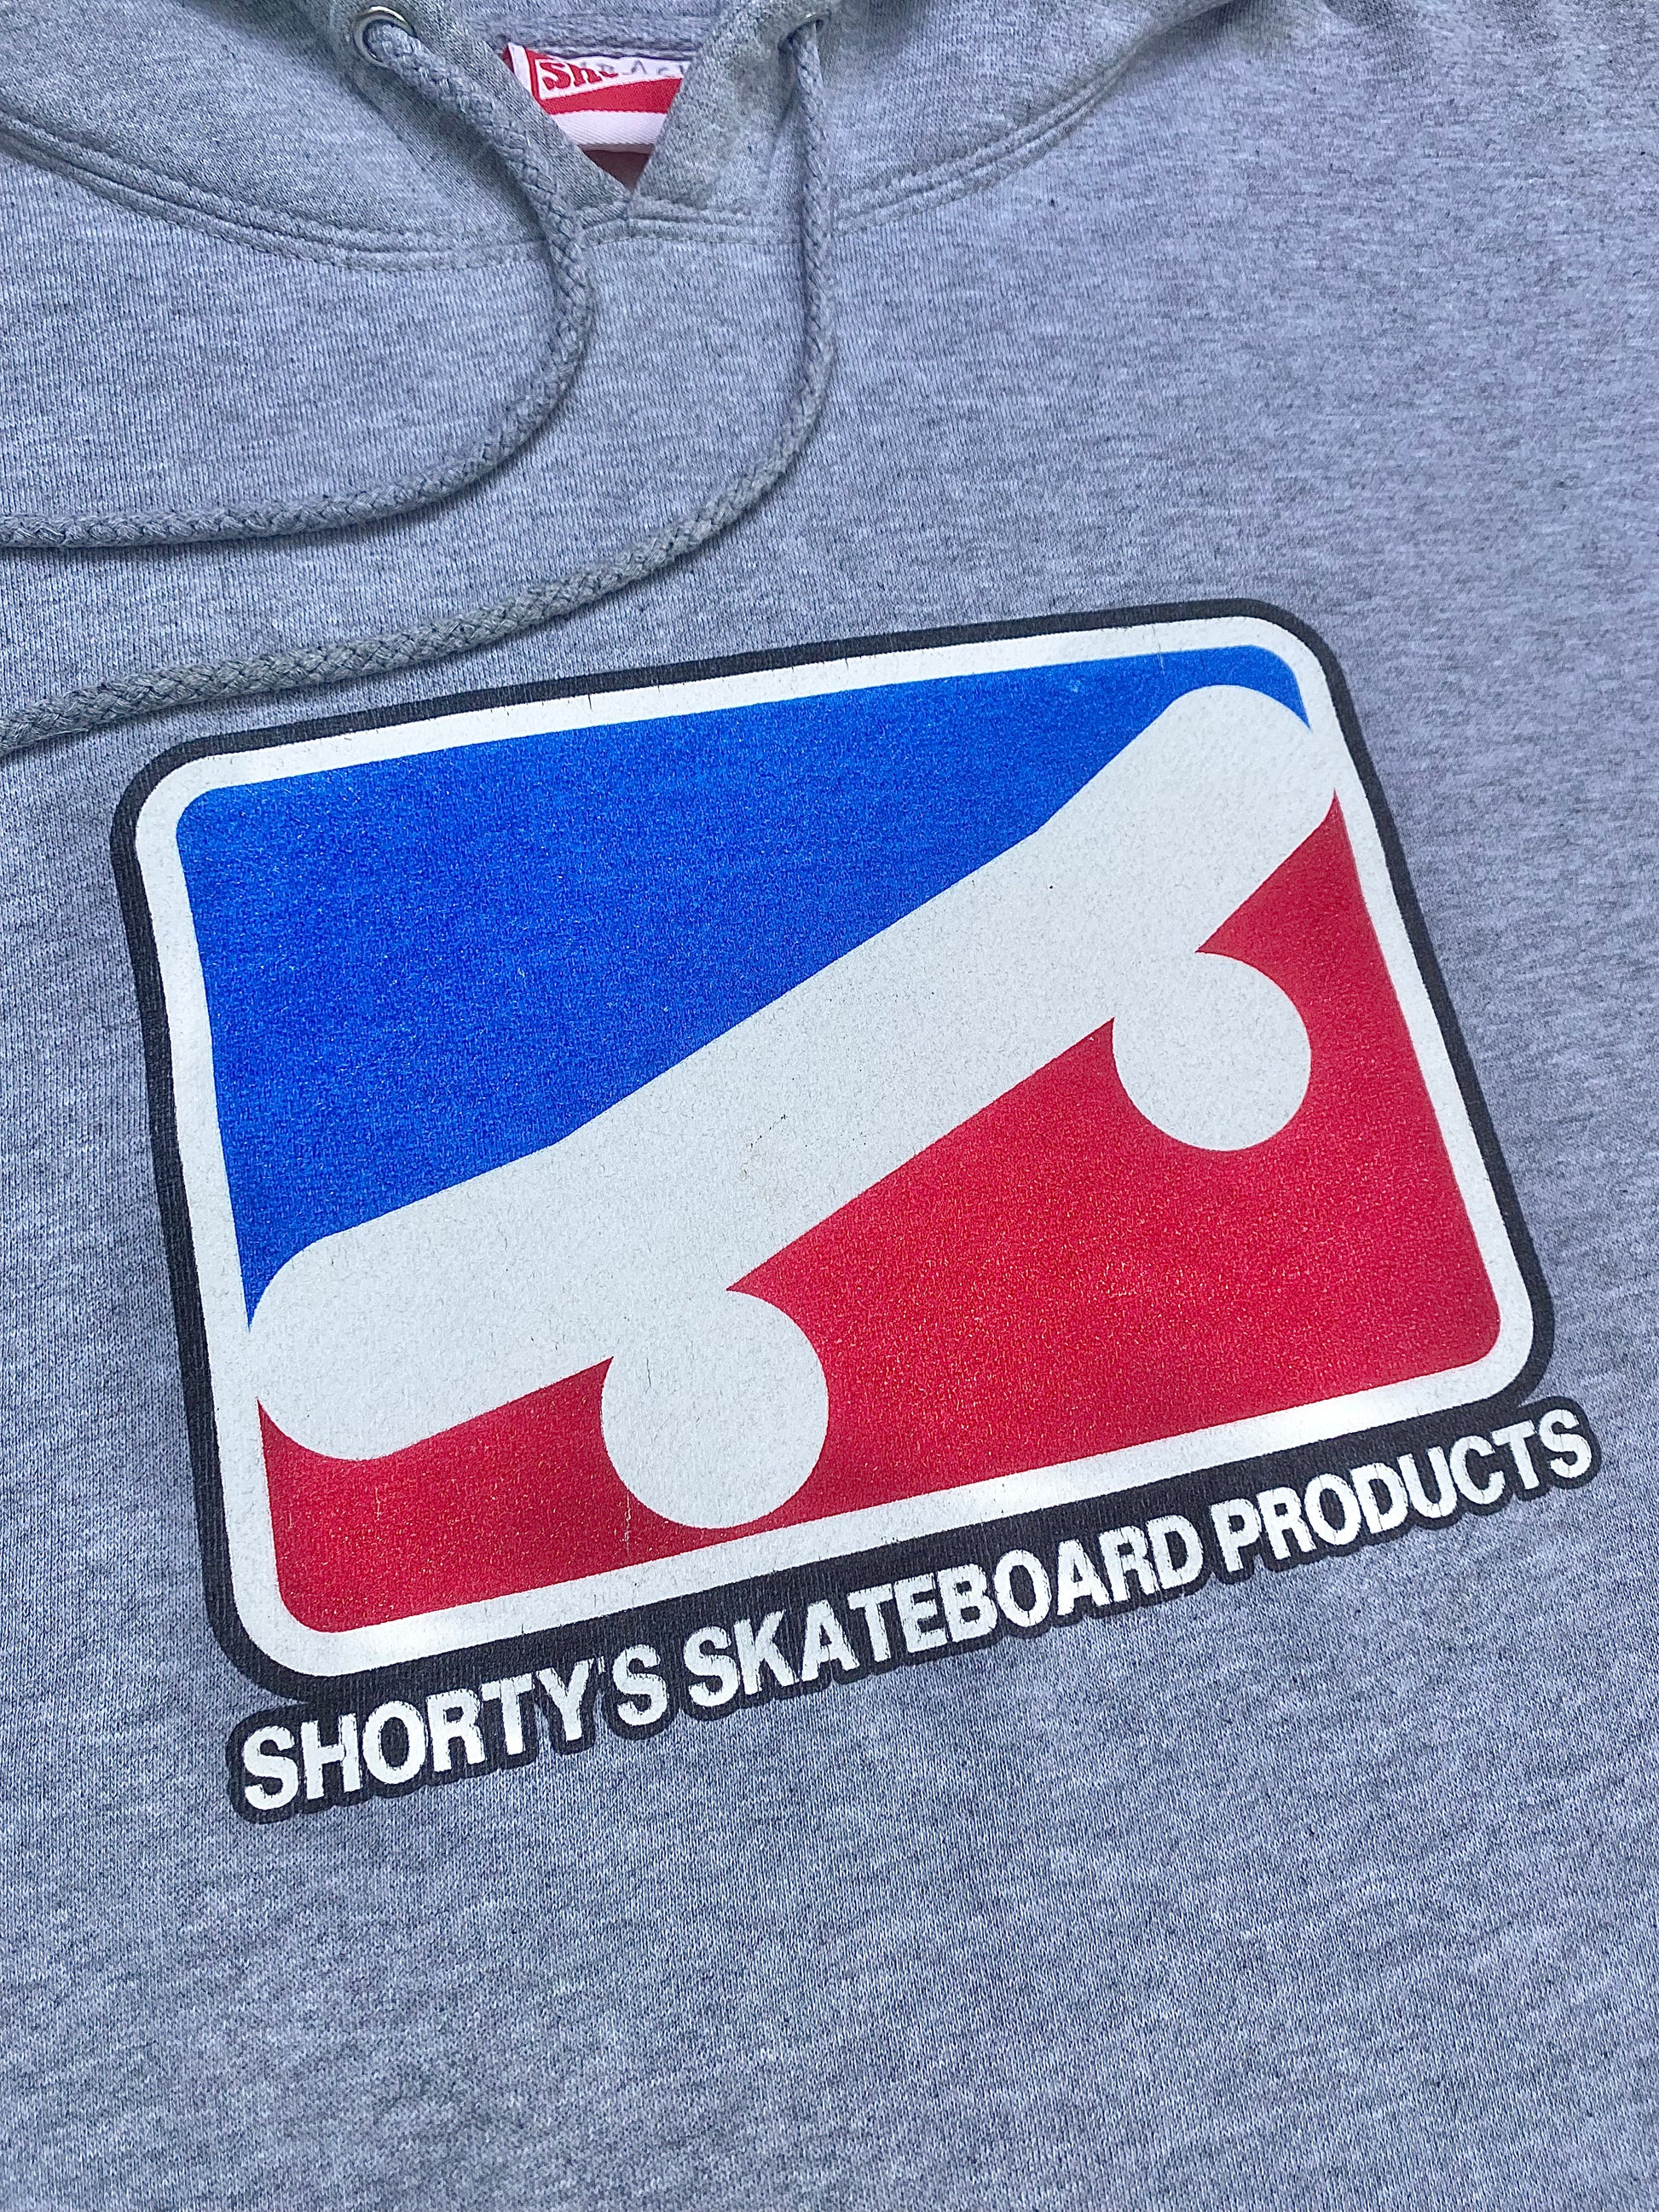 90s Shorty's Skateboard Products Hoodie (L) – GerbThrifts